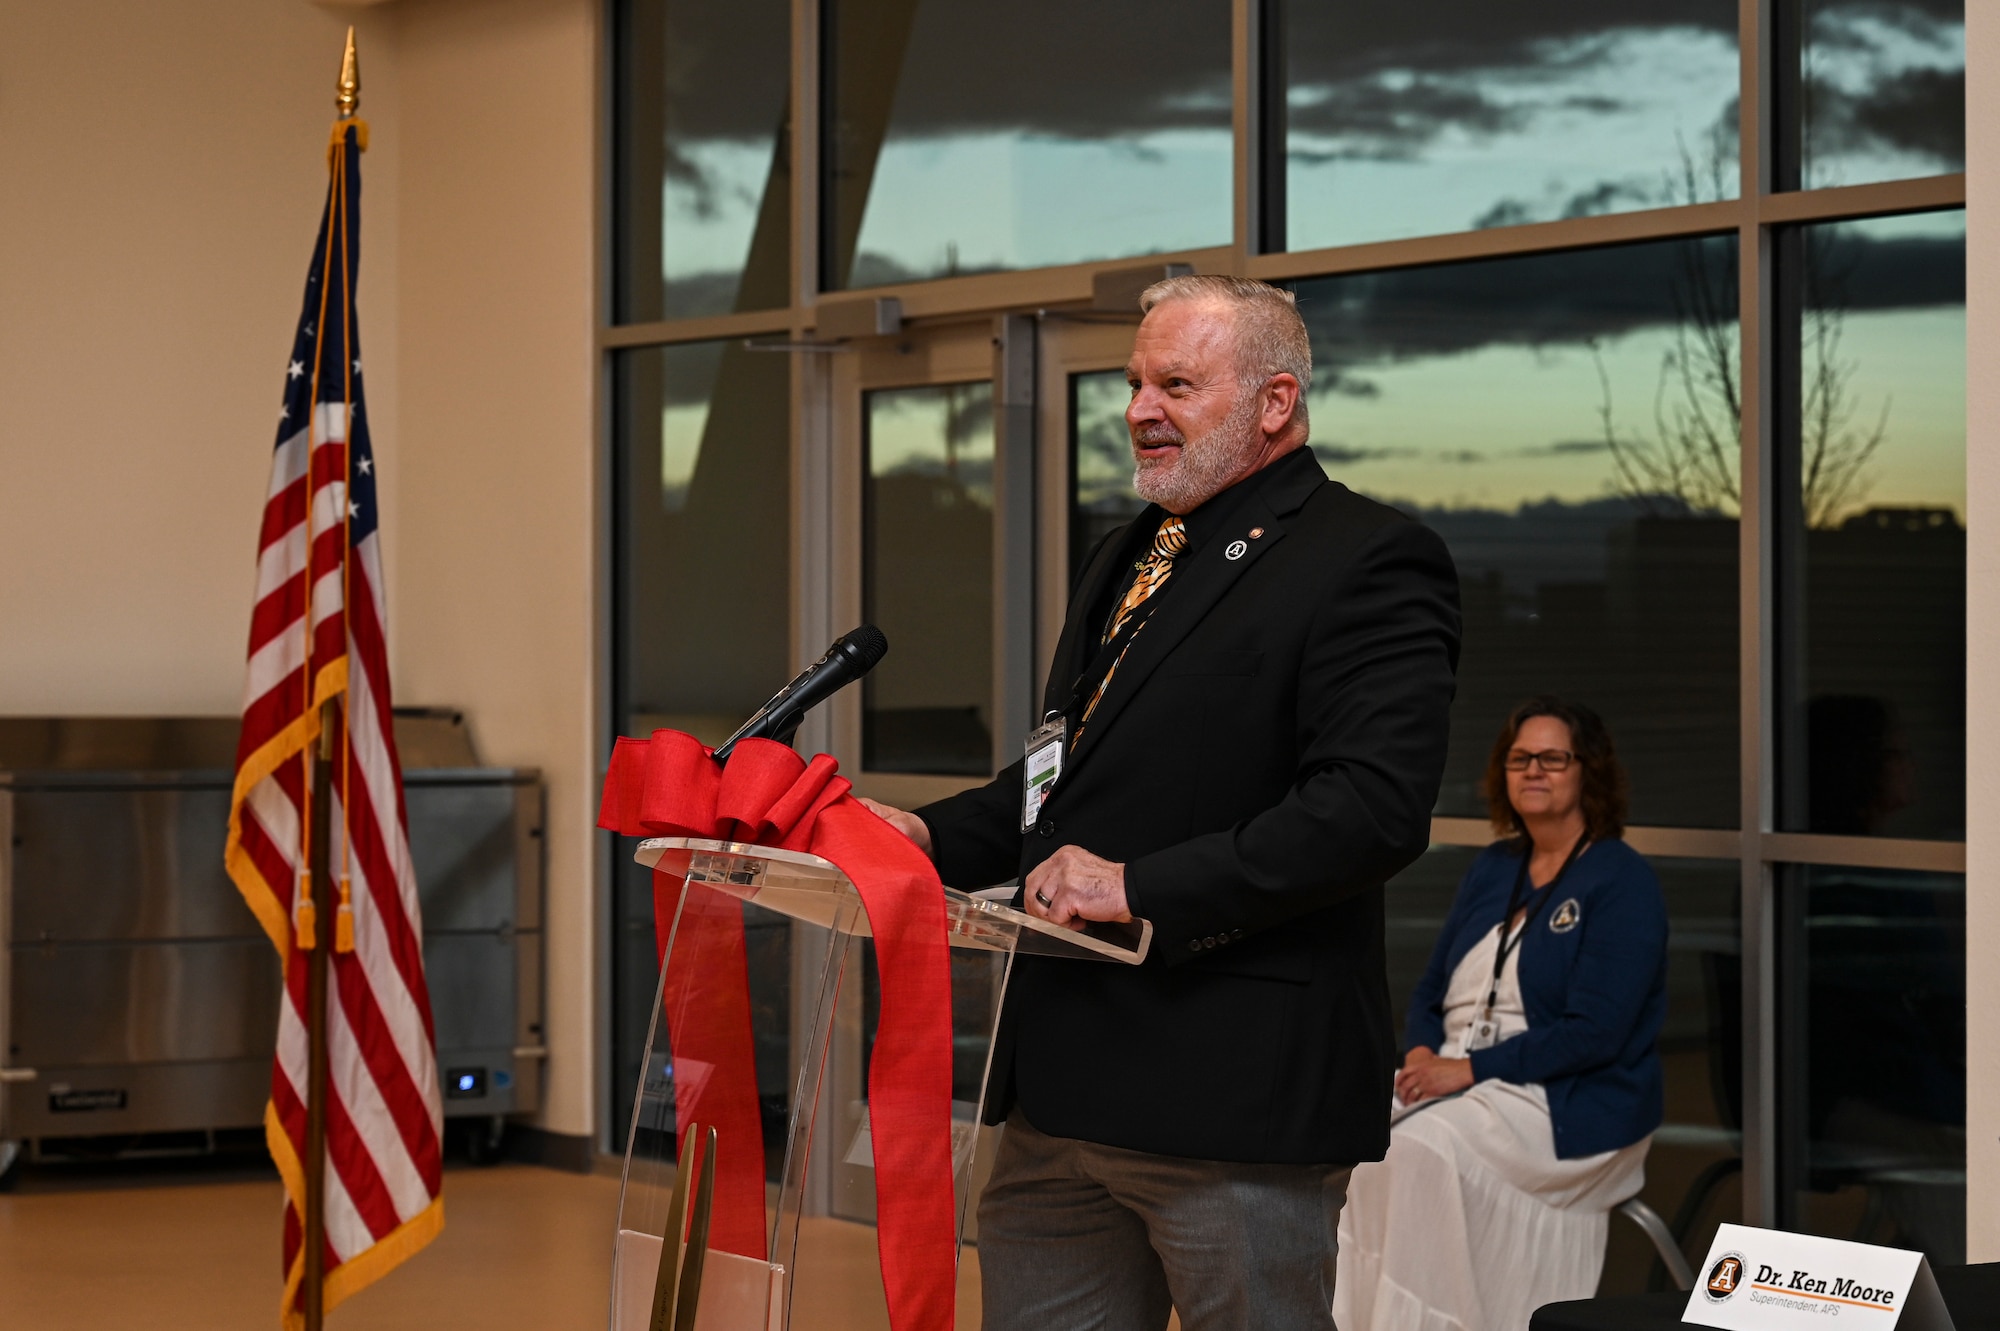 Dr. Ken Moore, Alamogordo Public Schools superintendent, speaks during the Holloman Elementary School Ribbon Cutting and Open House at Holloman Air Force Base, New Mexico, Jan. 17, 2023. Components of the new school include flexible spaces to accommodate more diversified learning activities, infrastructure to incorporate new technology, and new security measures. (U.S. Air Force photo by Airman 1st Class Isaiah Pedrazzini)